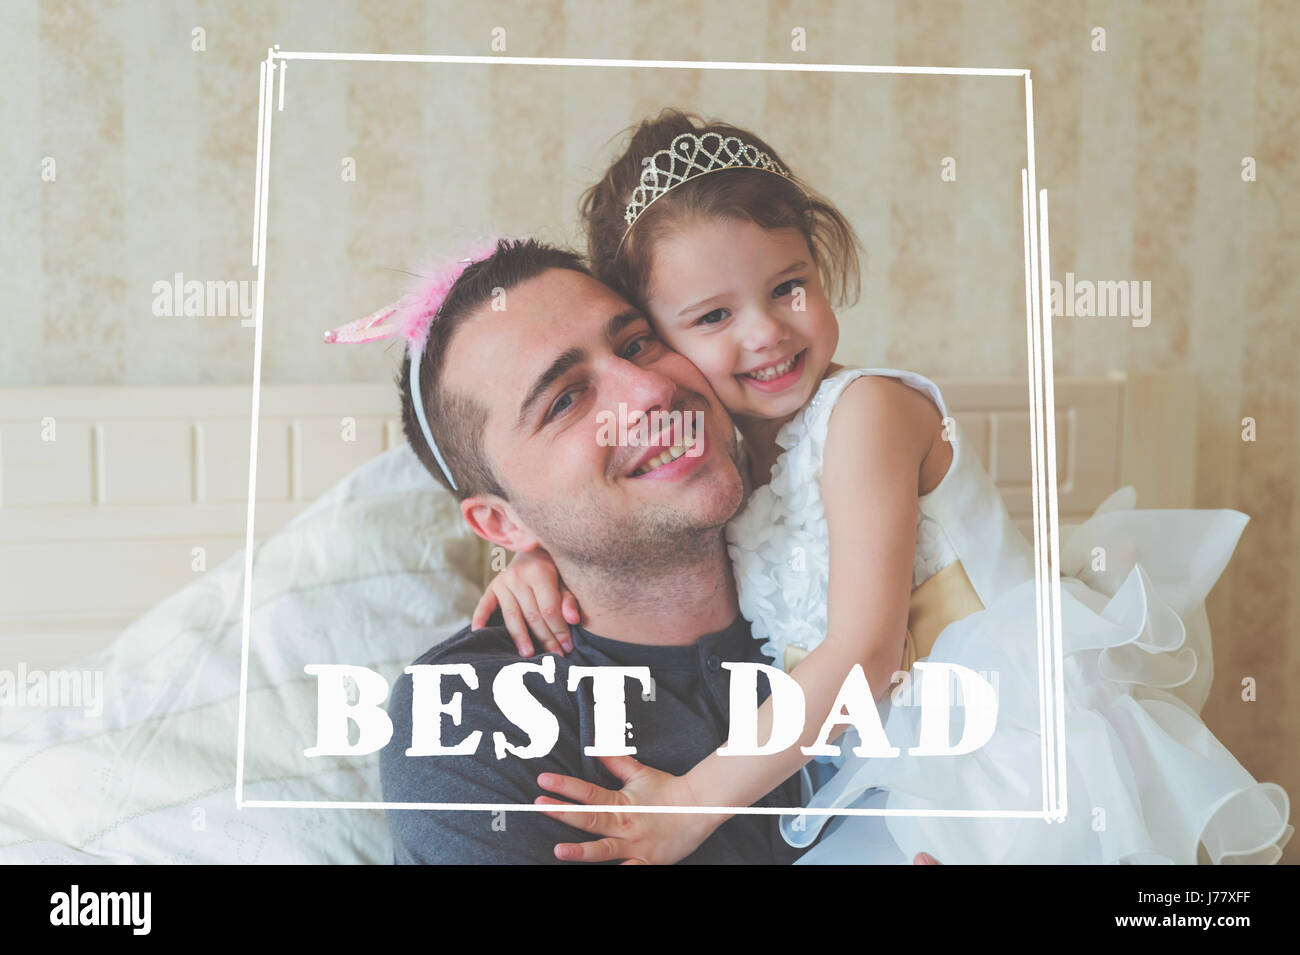 Little girl with father wearing crowns. Fathers day concept. Stock Photo